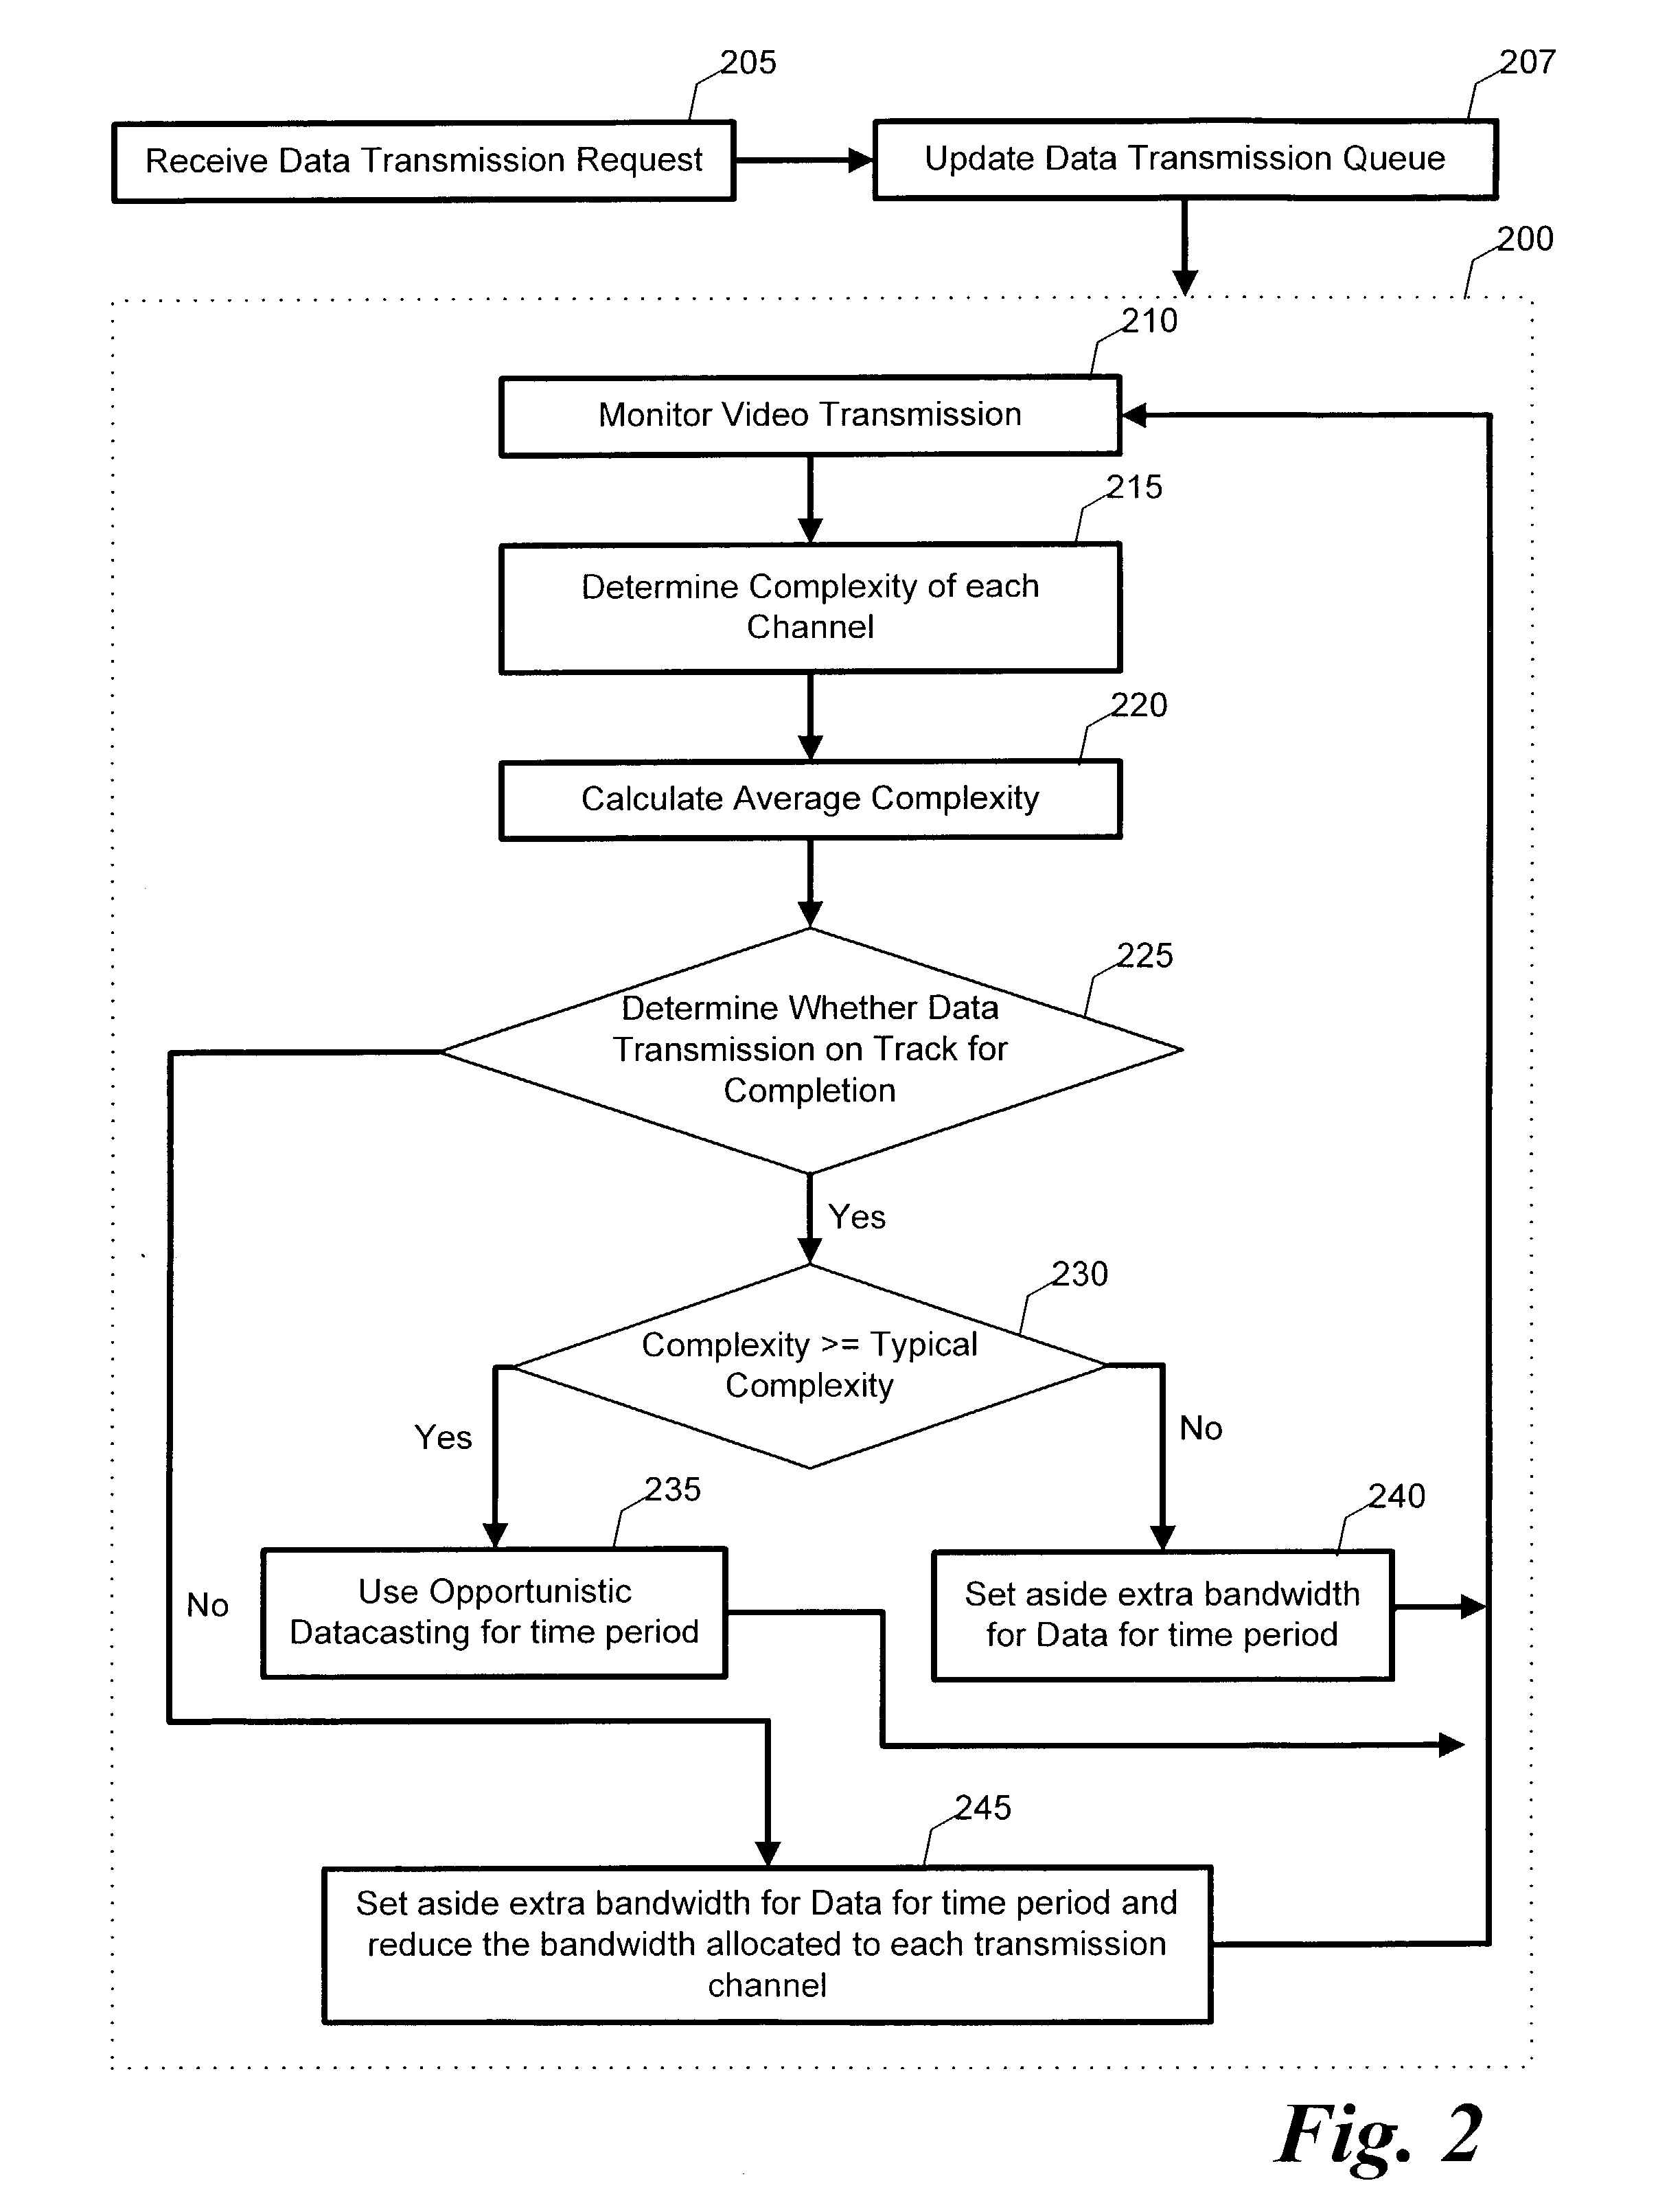 Systems and methods for providing on-demand datacasting